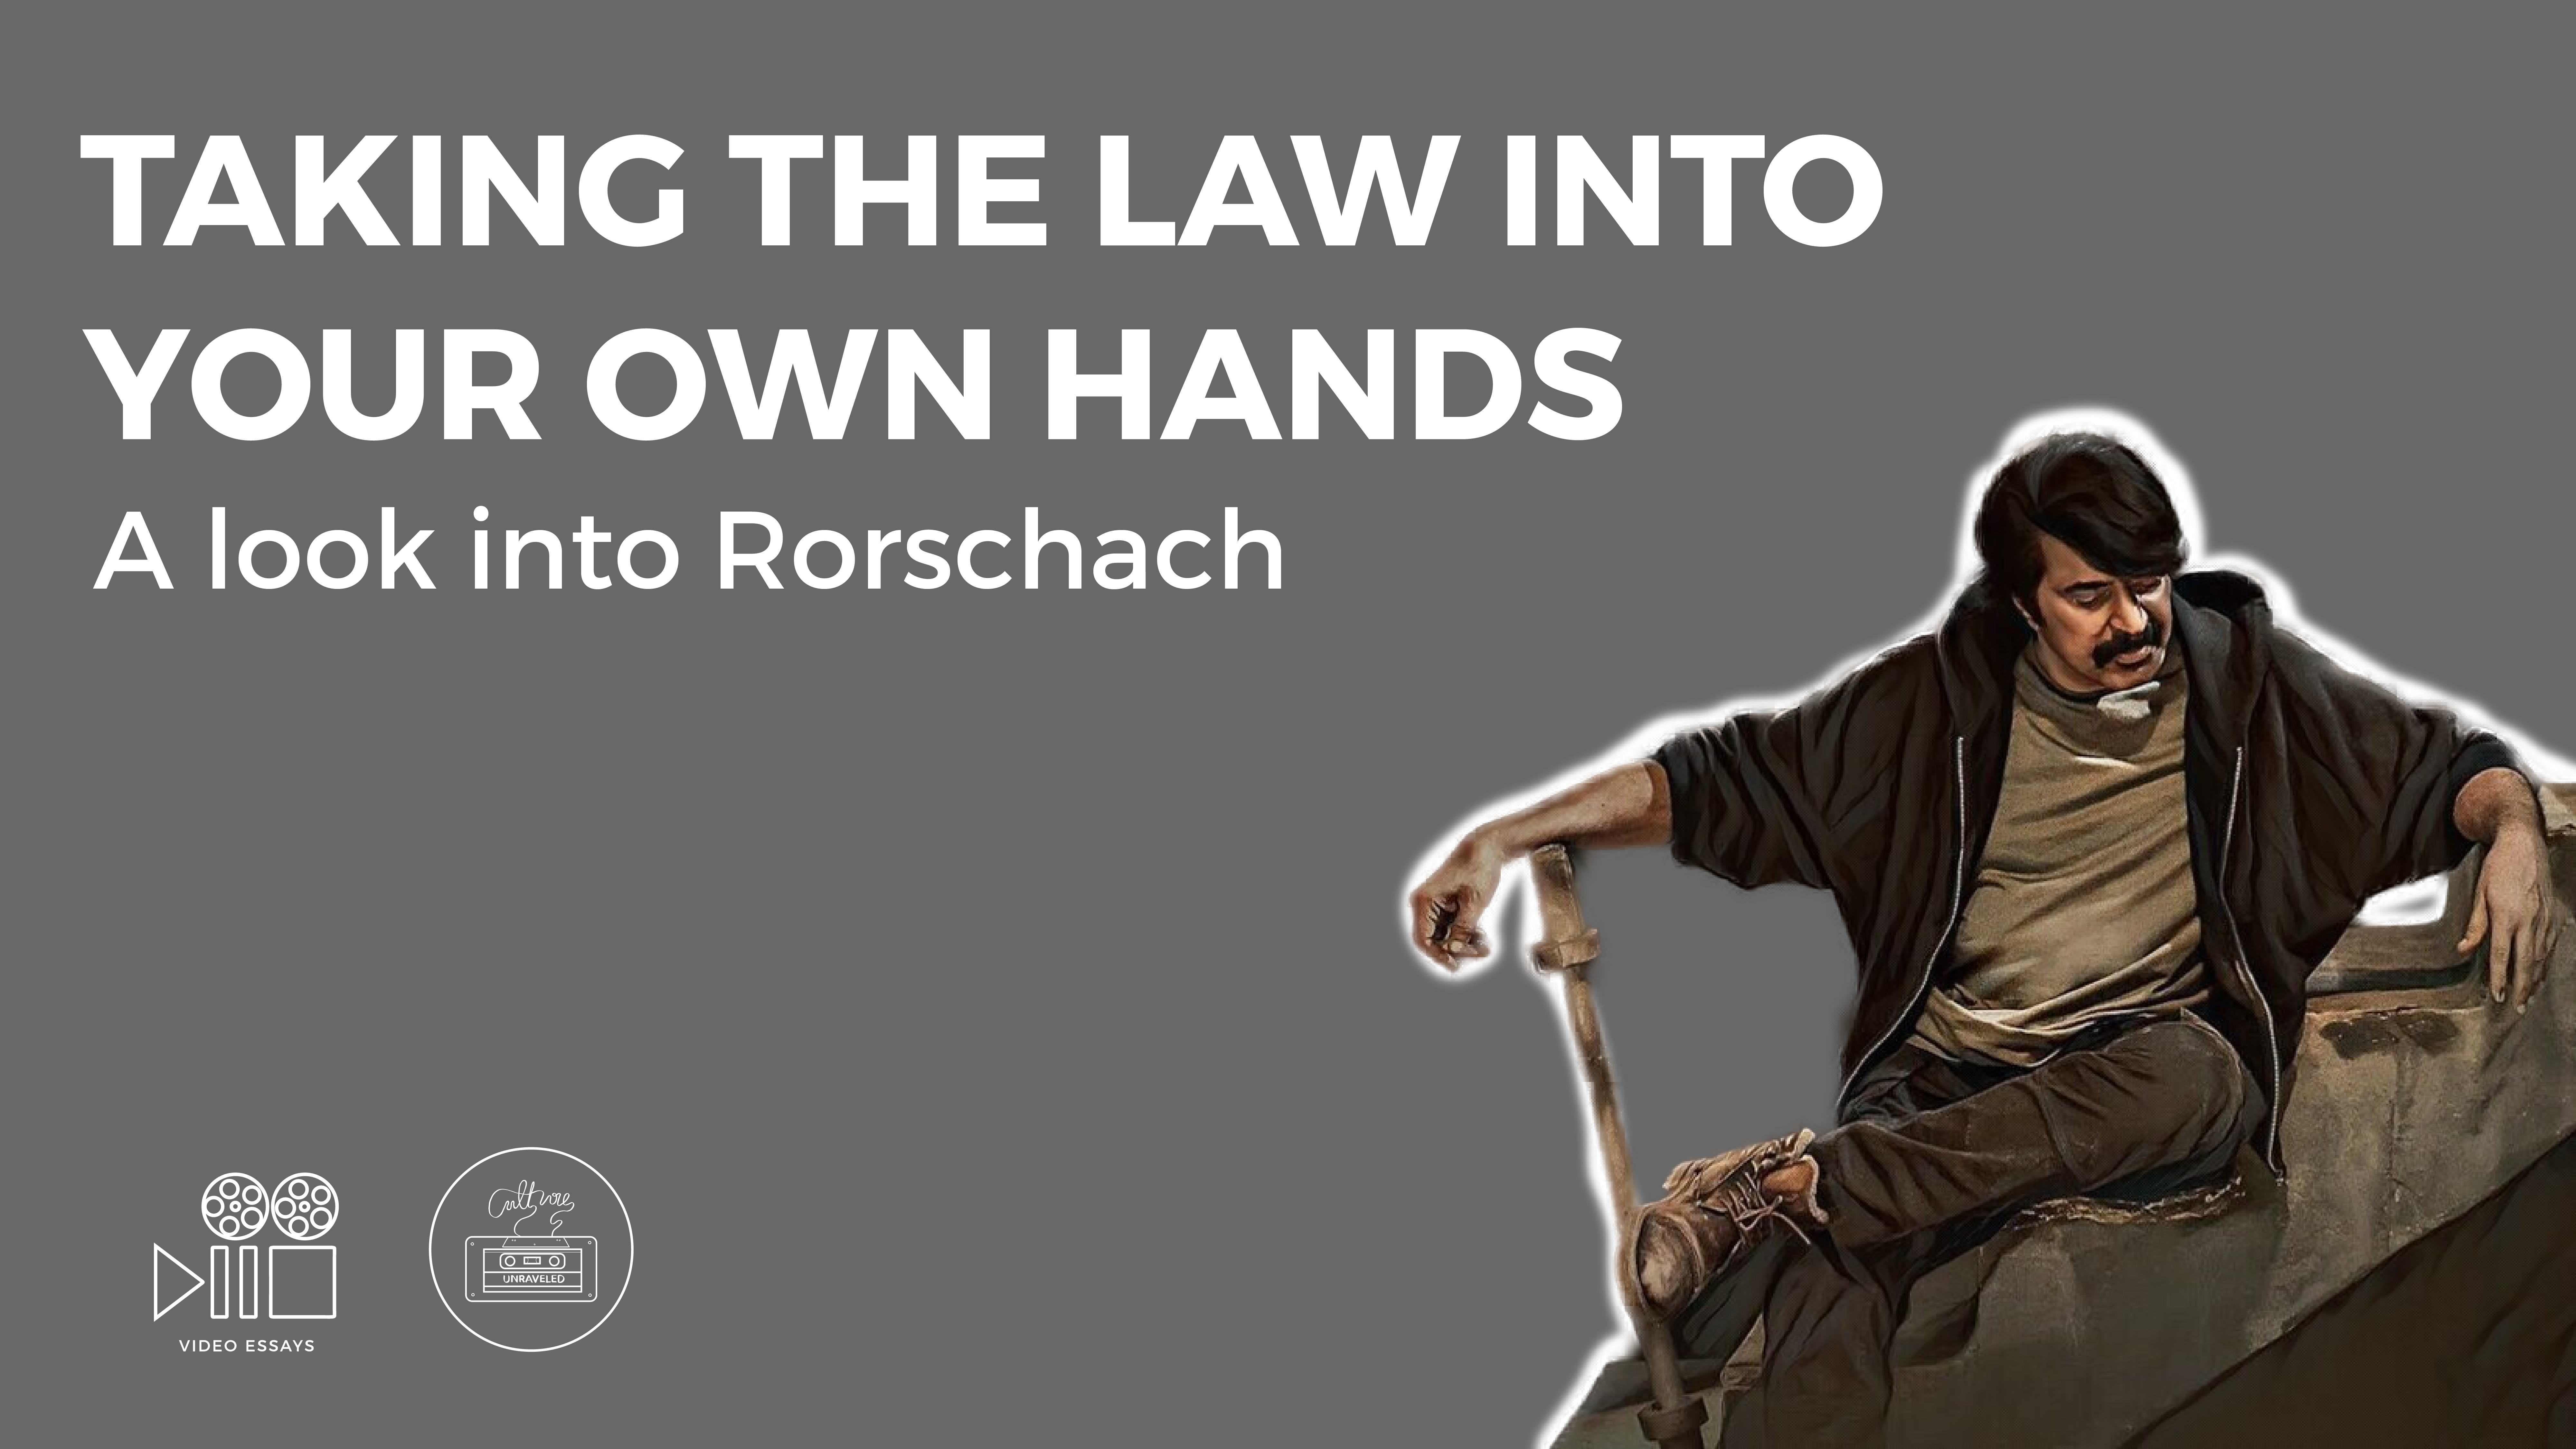 Taking the Law into your own Hands. A Look into Rorschach